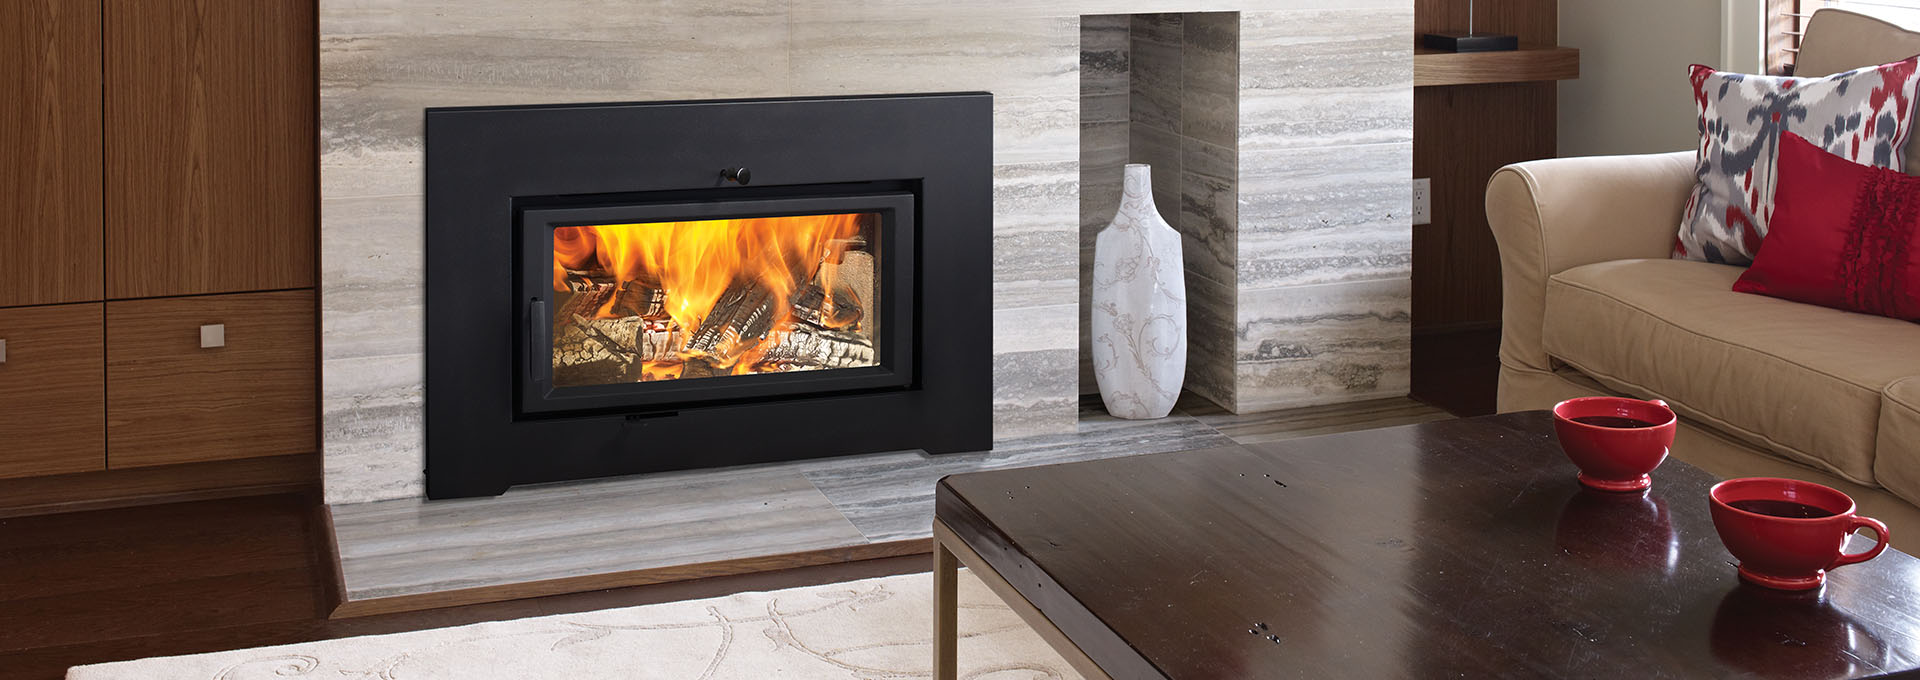 Gas Insert for Wood Fireplace Awesome Wood Inserts Epa Certified